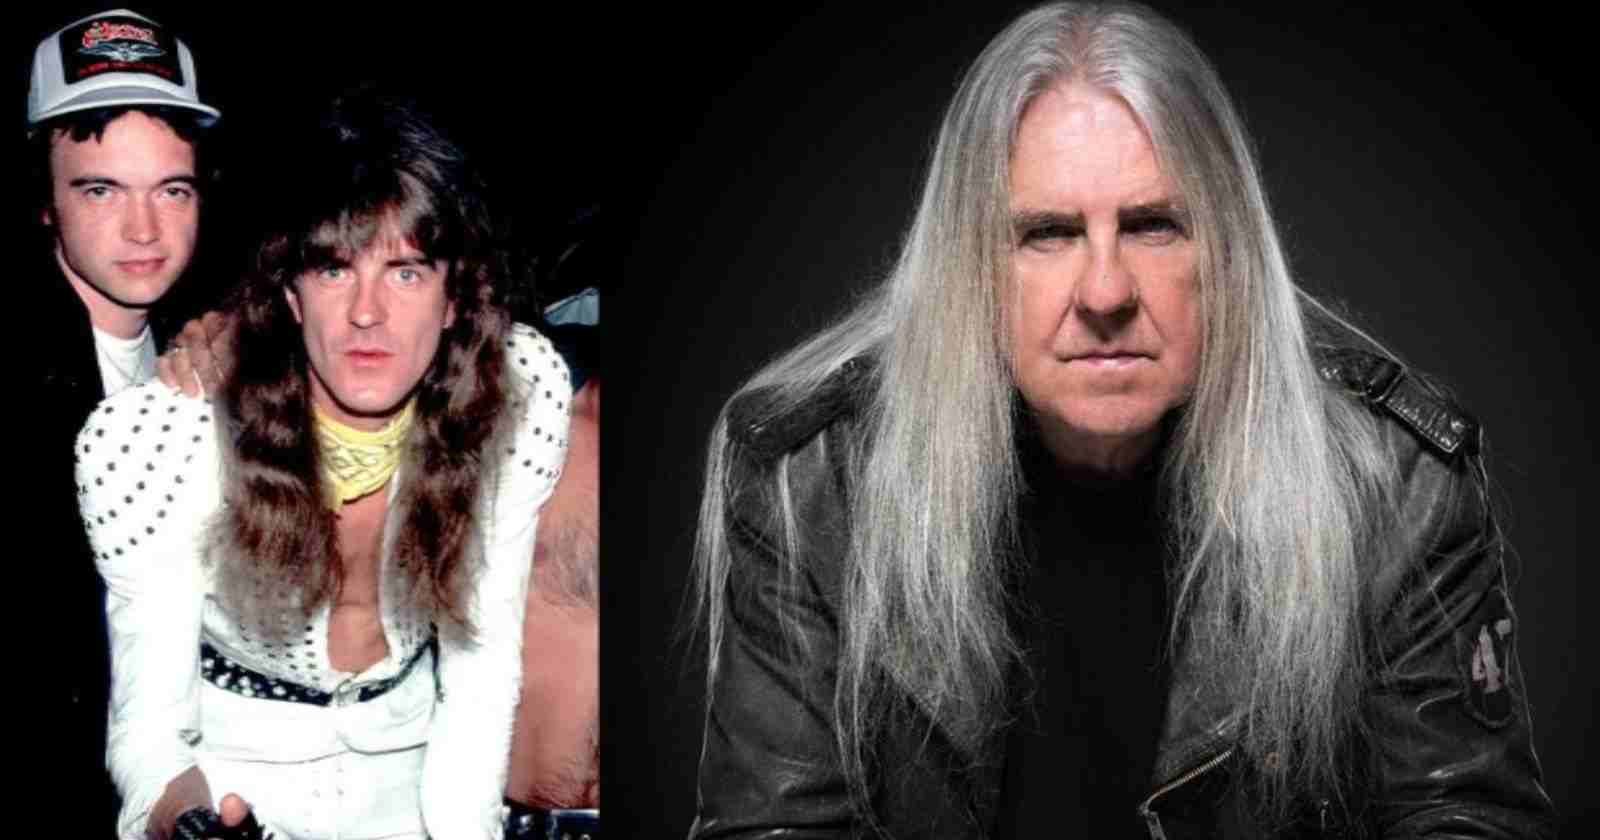 Biff Byford now and then